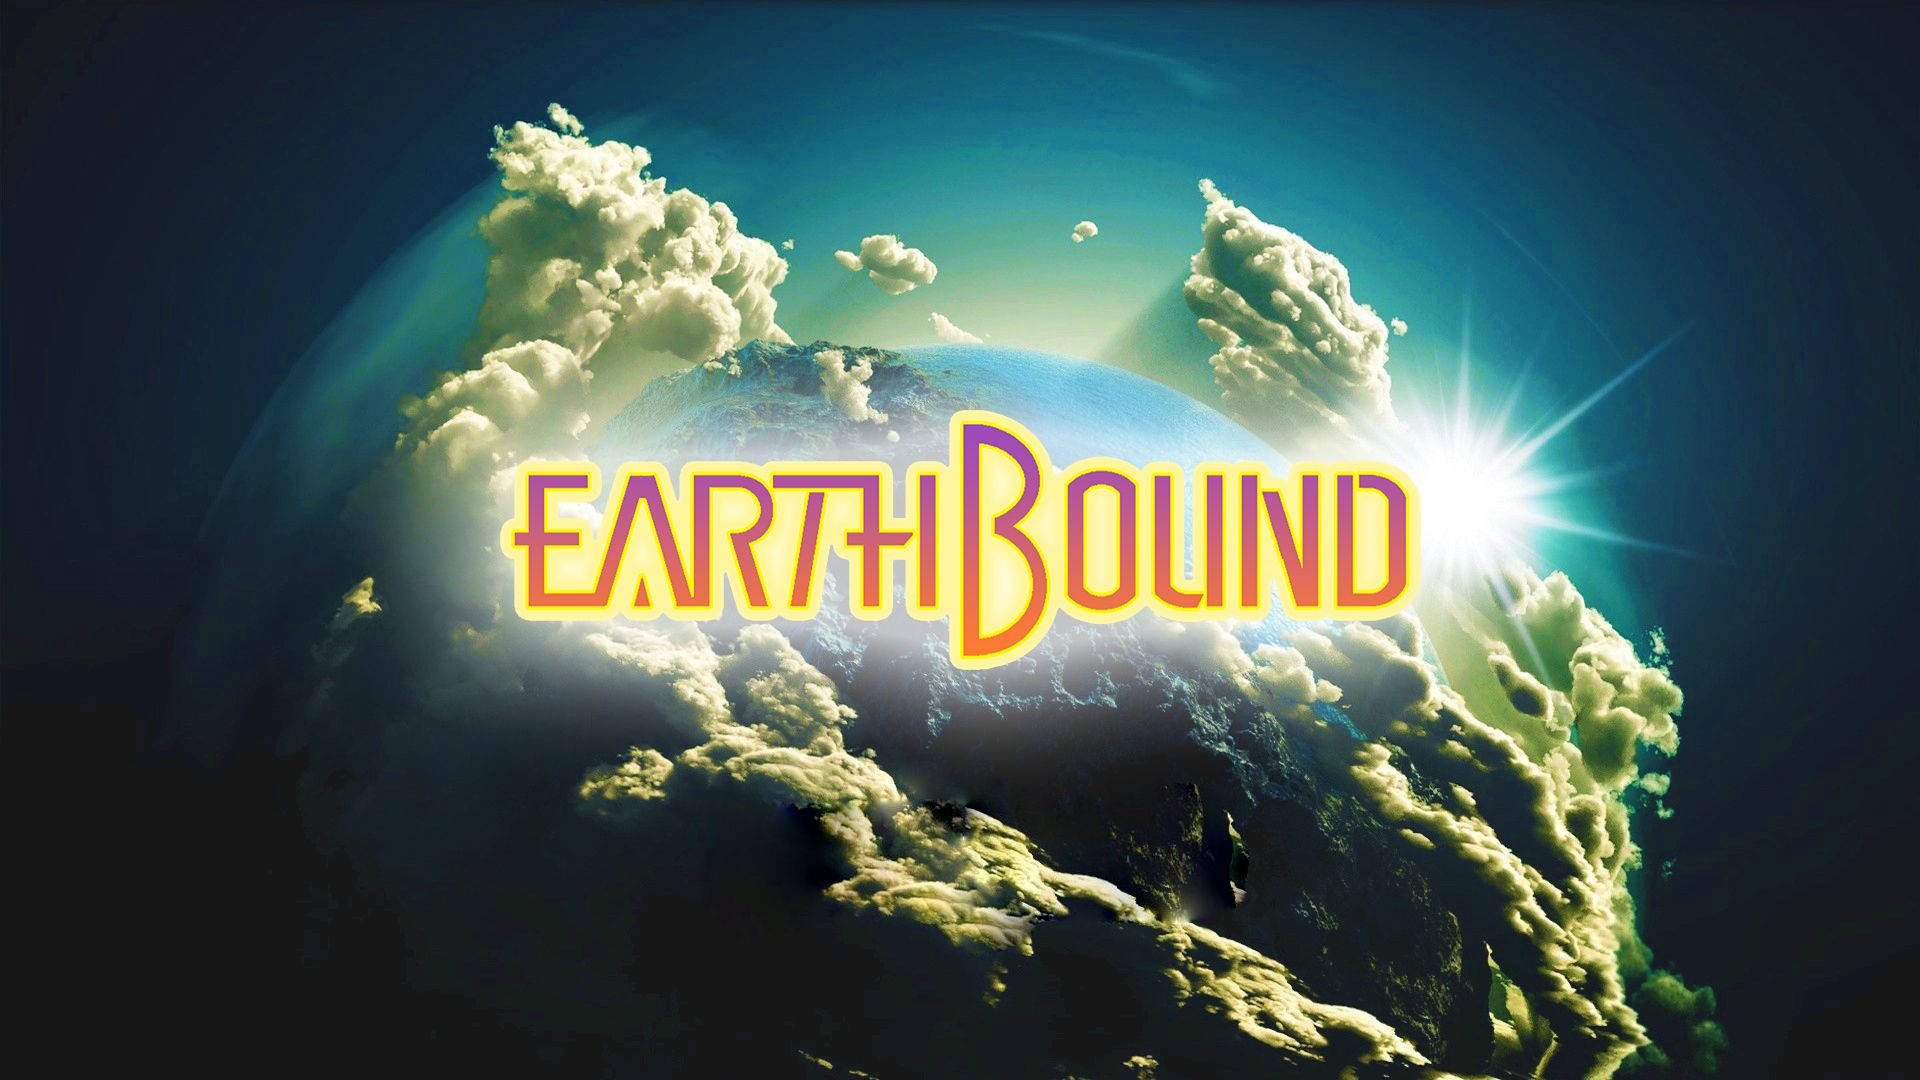 Earthbound - A Planet on the Brink Wallpaper